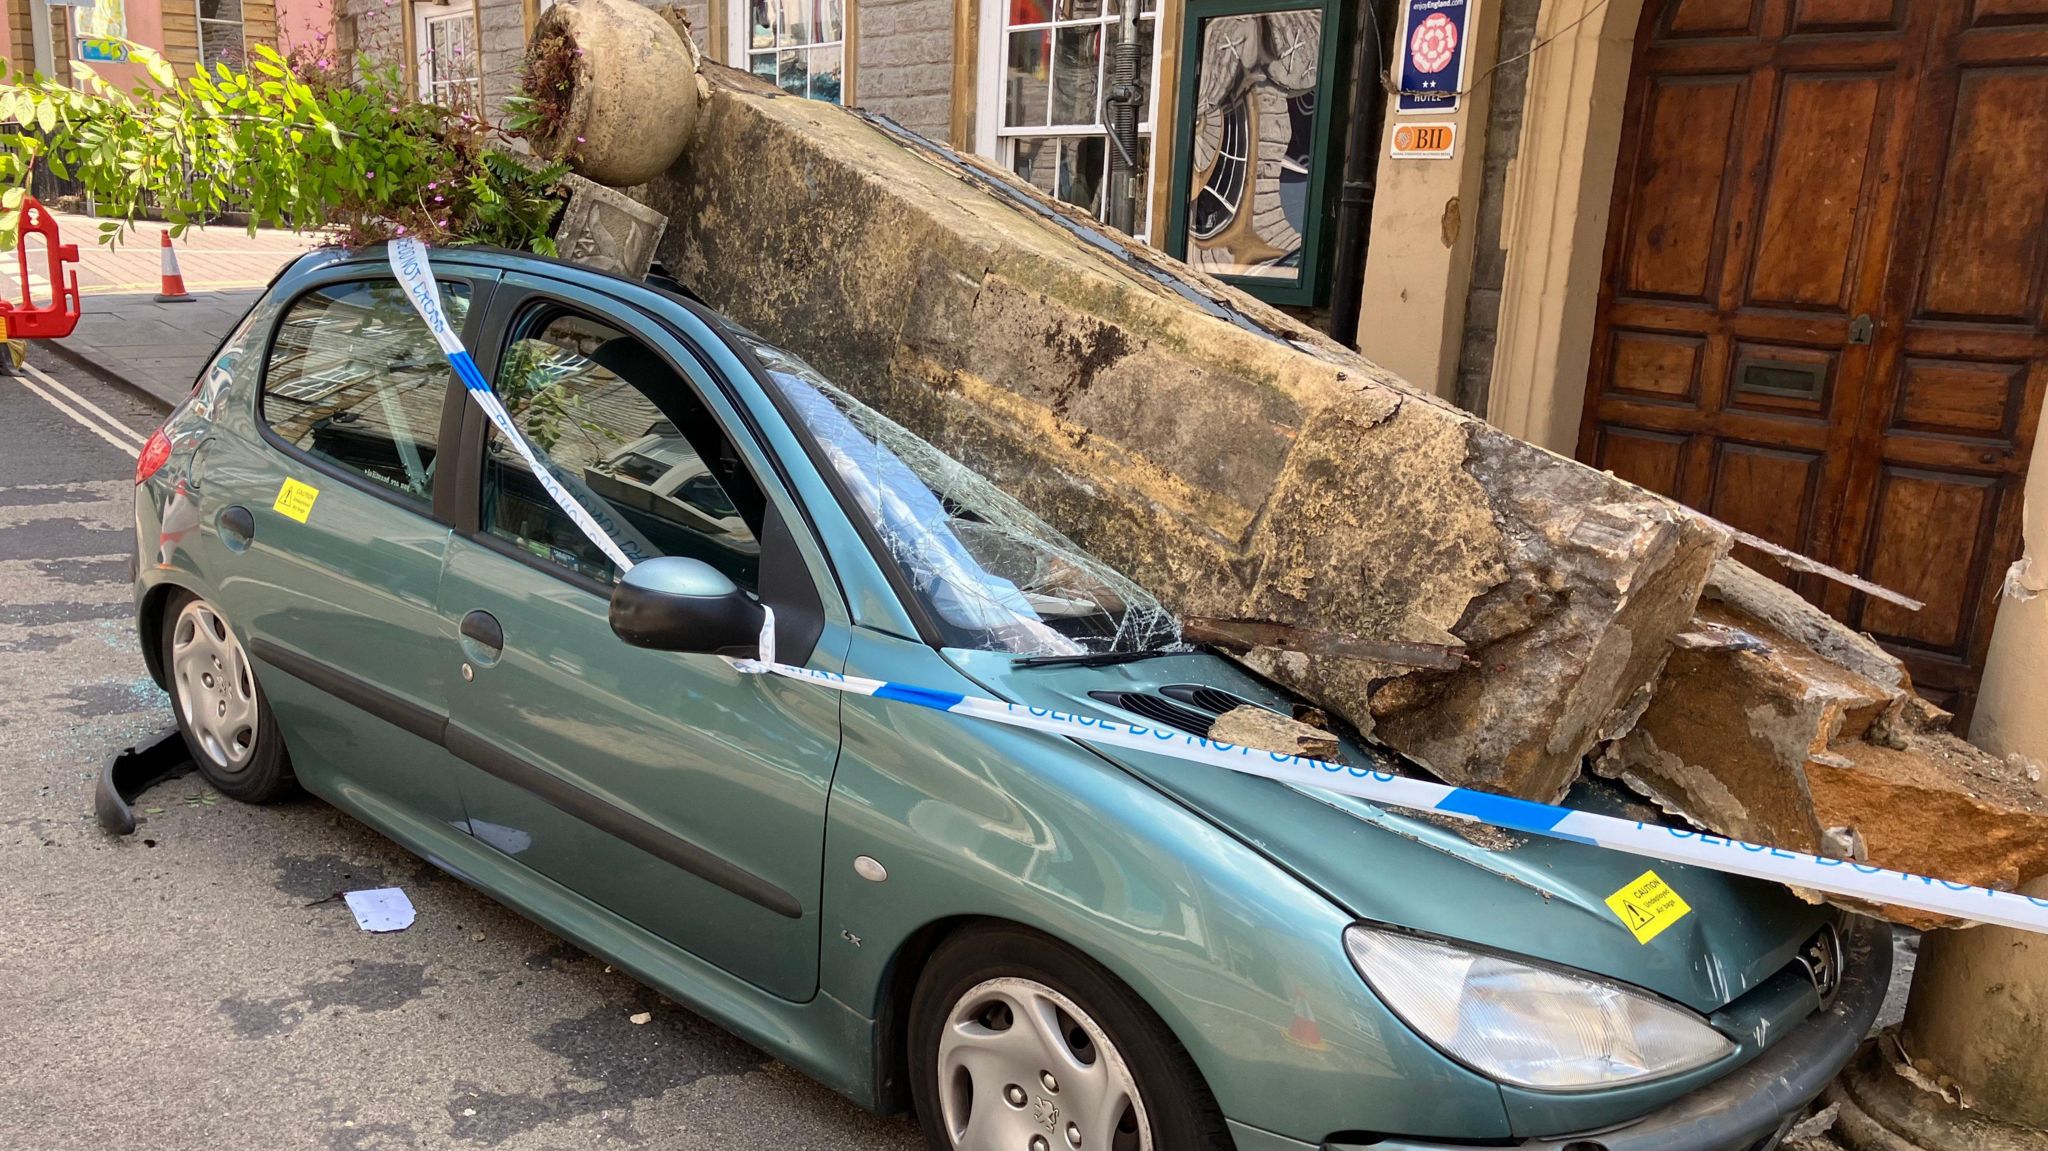 Image of a green Peugeot which crashed. Police tape can be seen around the vehicle, and a large pillar is on top of the windscreen.